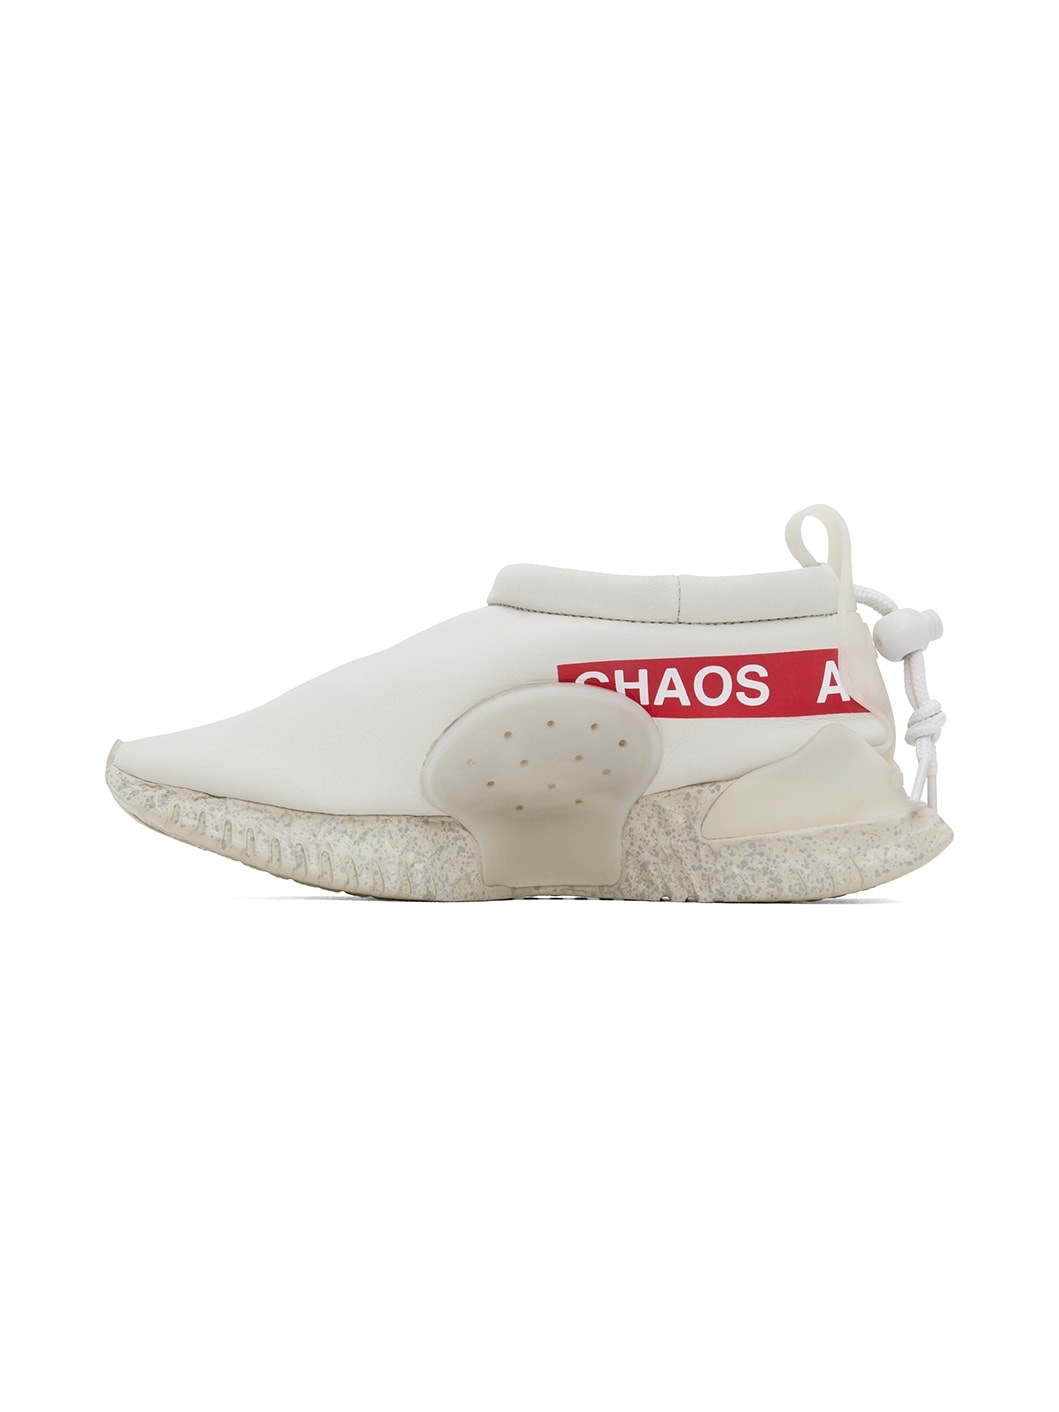 Off-White UNDERCOVER Edition Moc Flow SP Sneakers - 3